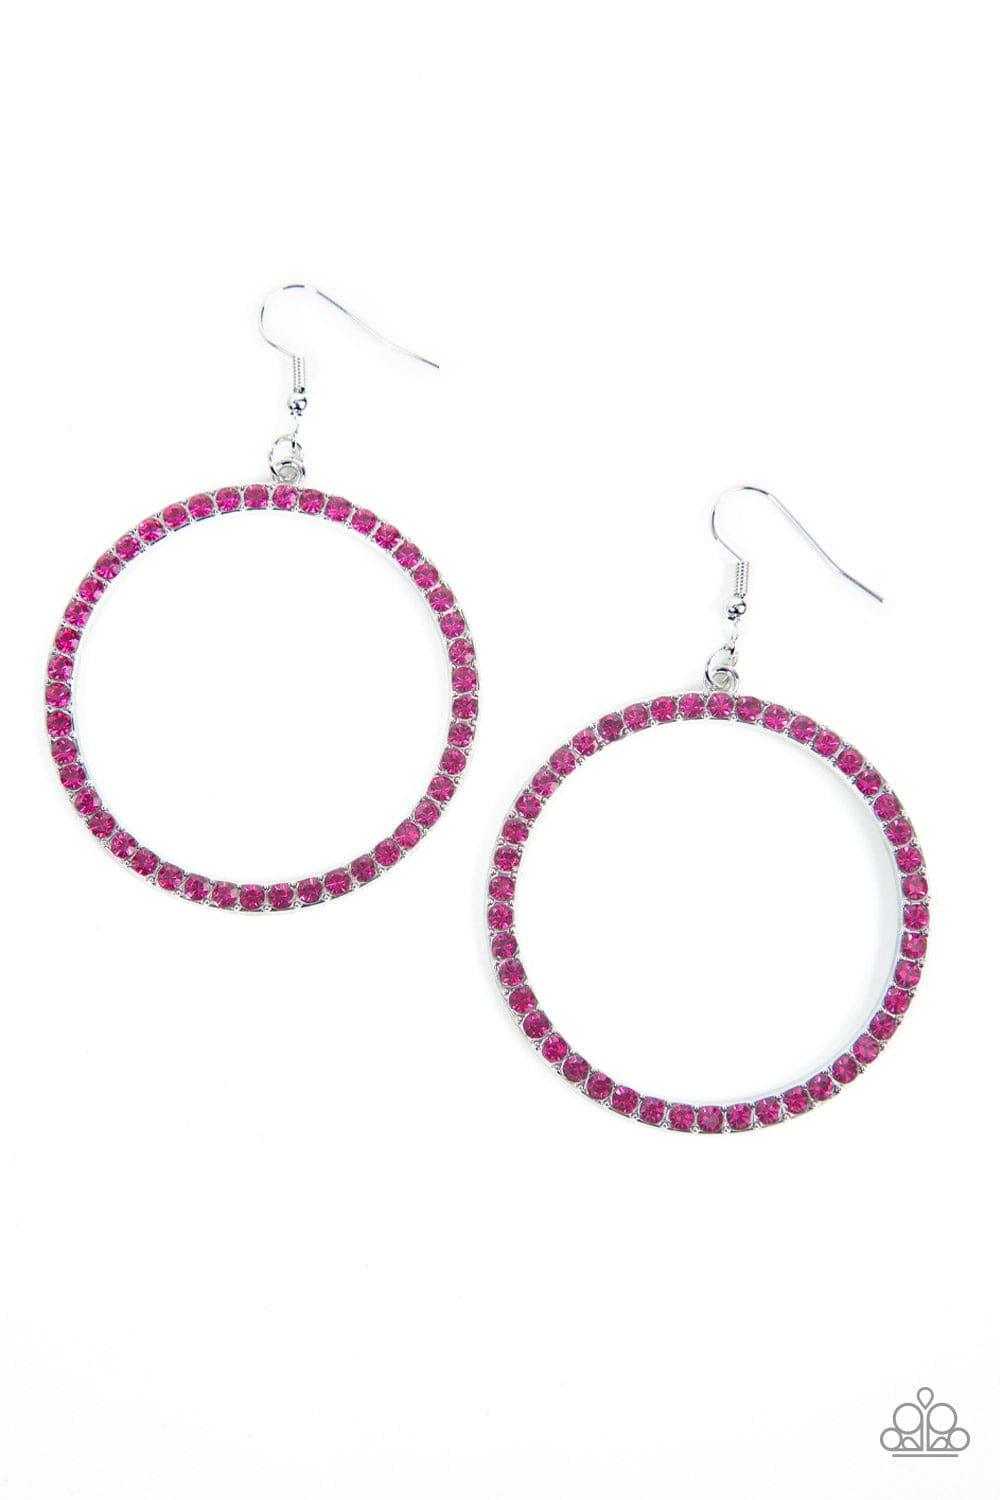 Paparazzi Accessories - Head-turning Halo - Pink Earrings - Bling by JessieK